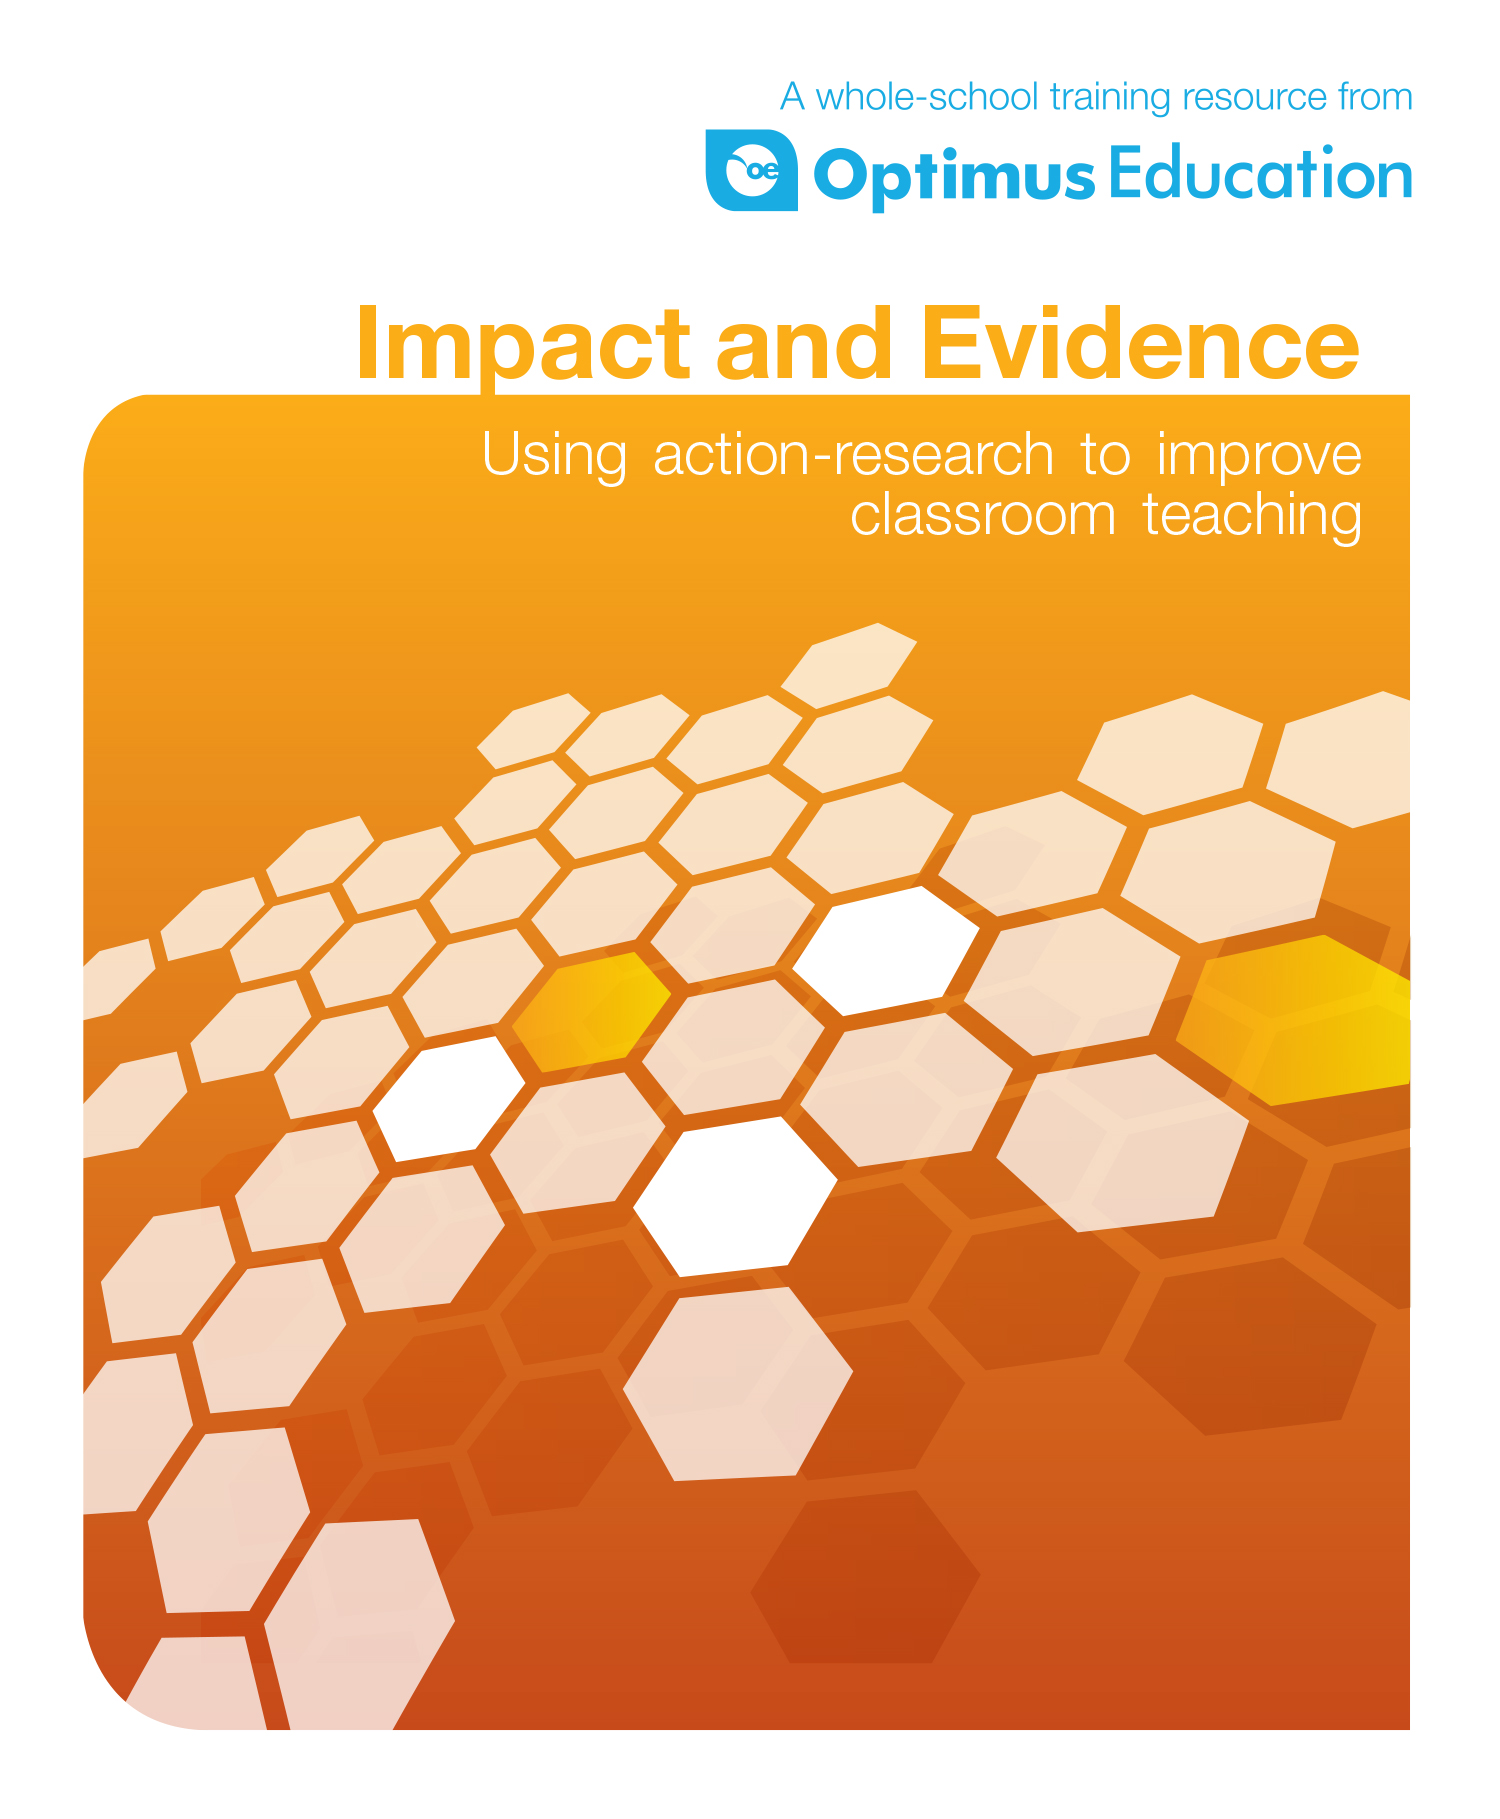 Impact and Evidence: Using action research to improve classroom teaching